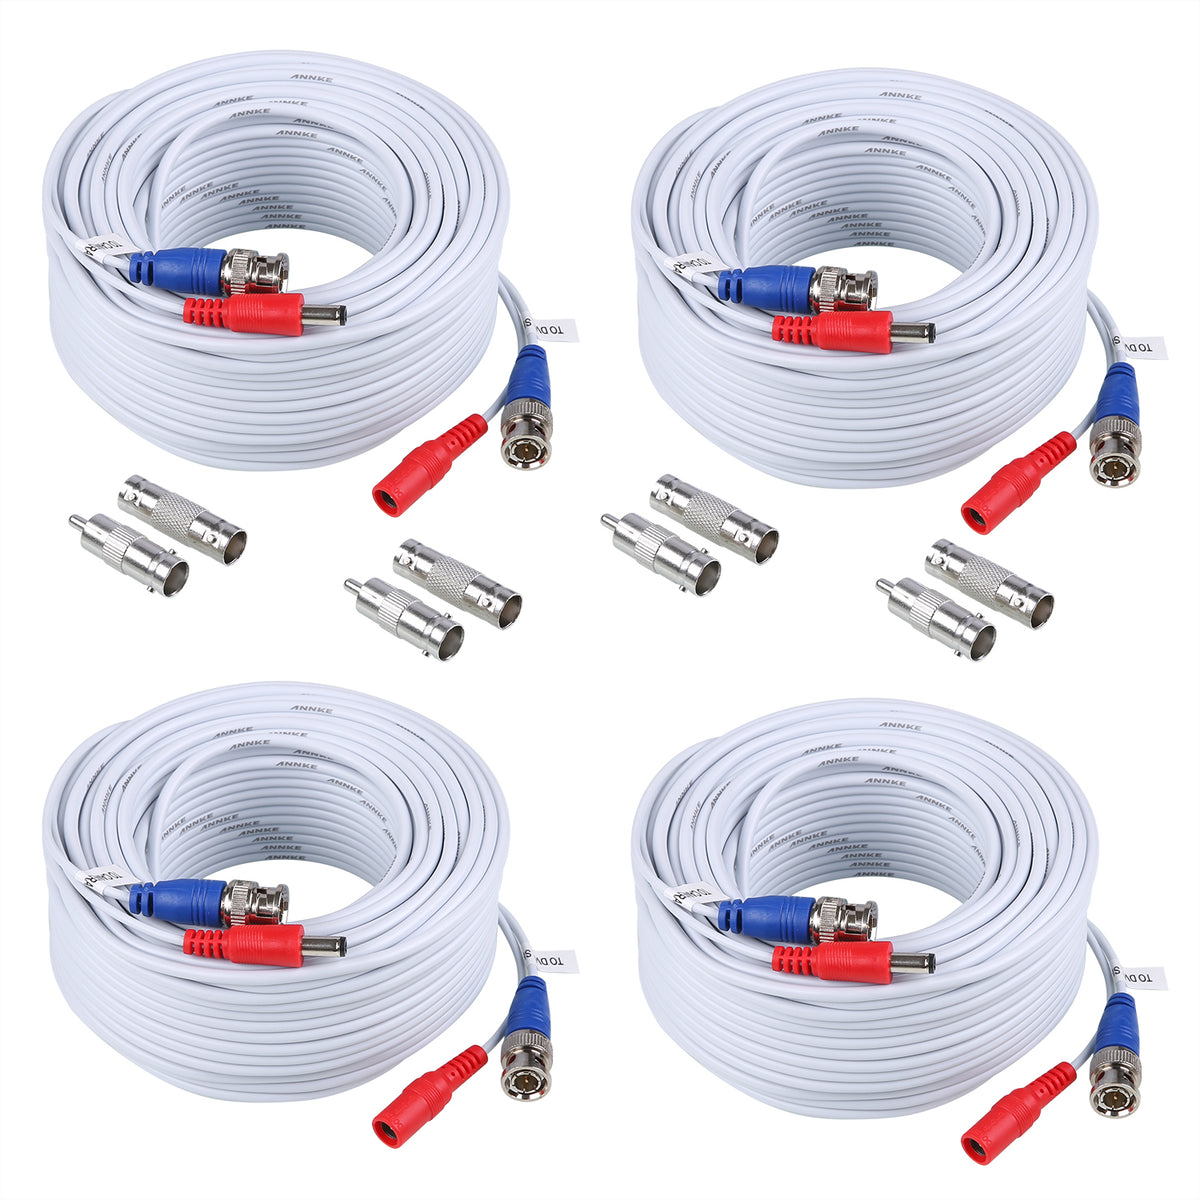 4pcs 100ft 30M White CCTV BNC Power Cable for Home Surveillance Camera System